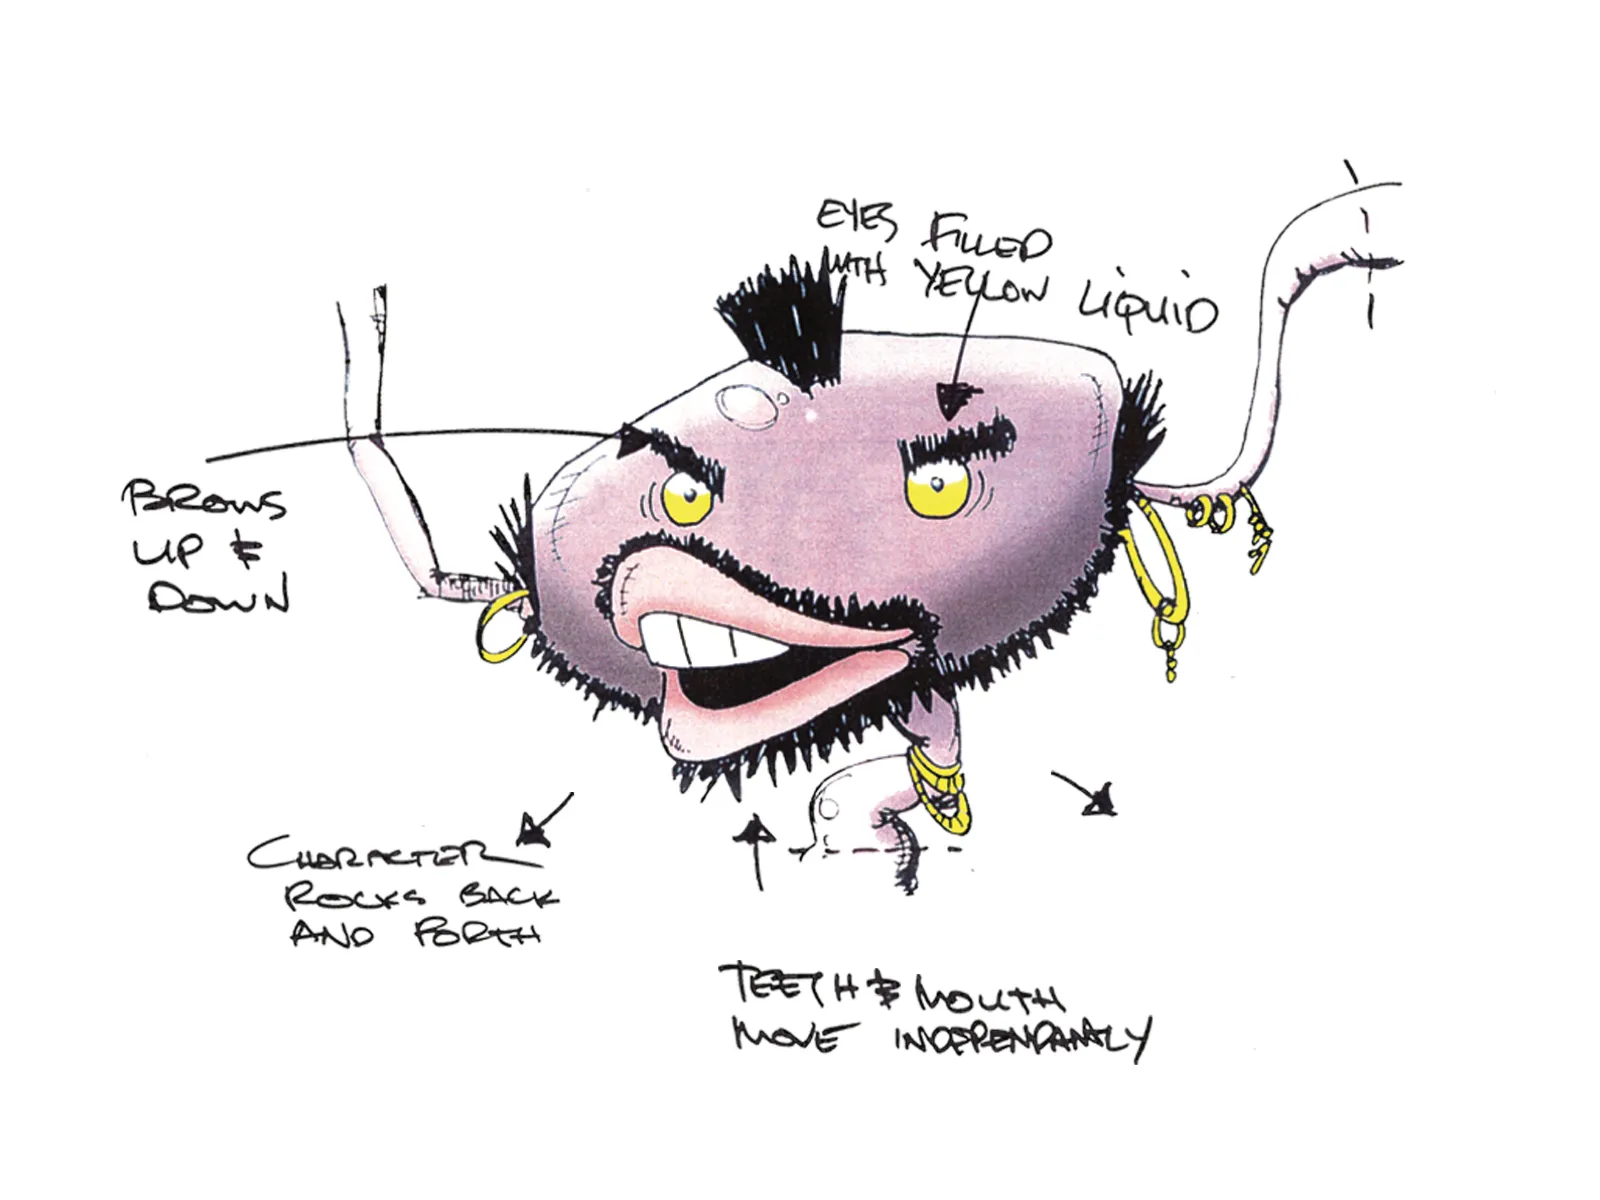 Planning drawing of Health Royale liver: Brows up and down. Eyes filled with yellow liquid. Teeth and mouth move independently. Character rocks back and forth.